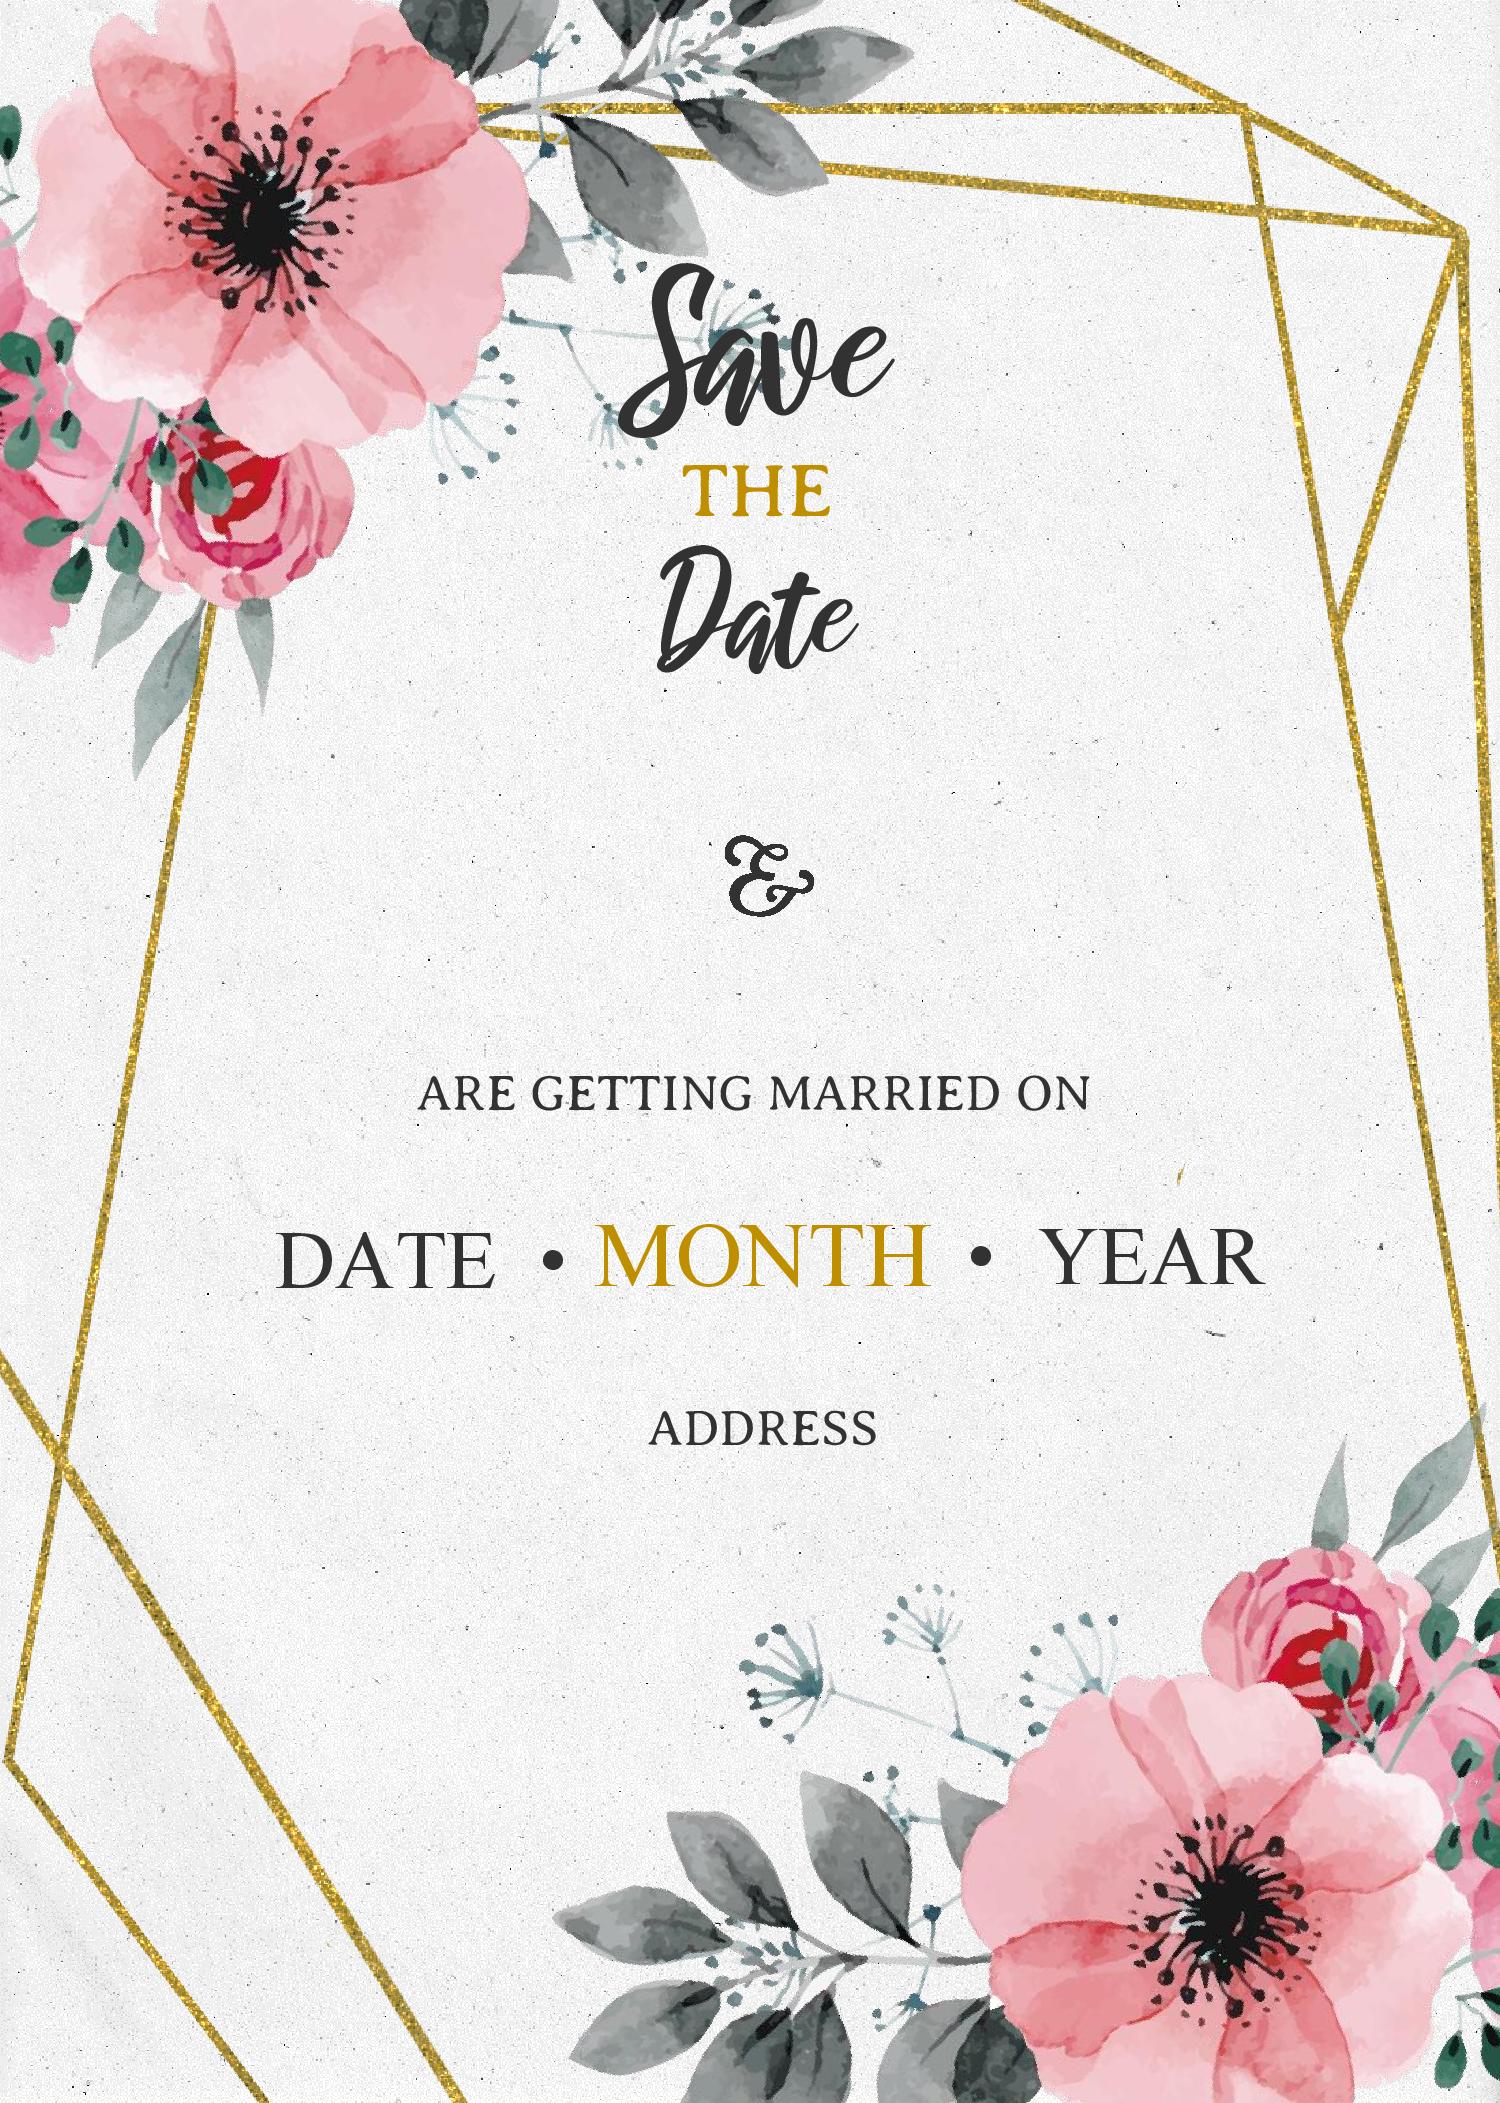 Save The Date Invitation Templates - Editable With MS Word and has Pink floral